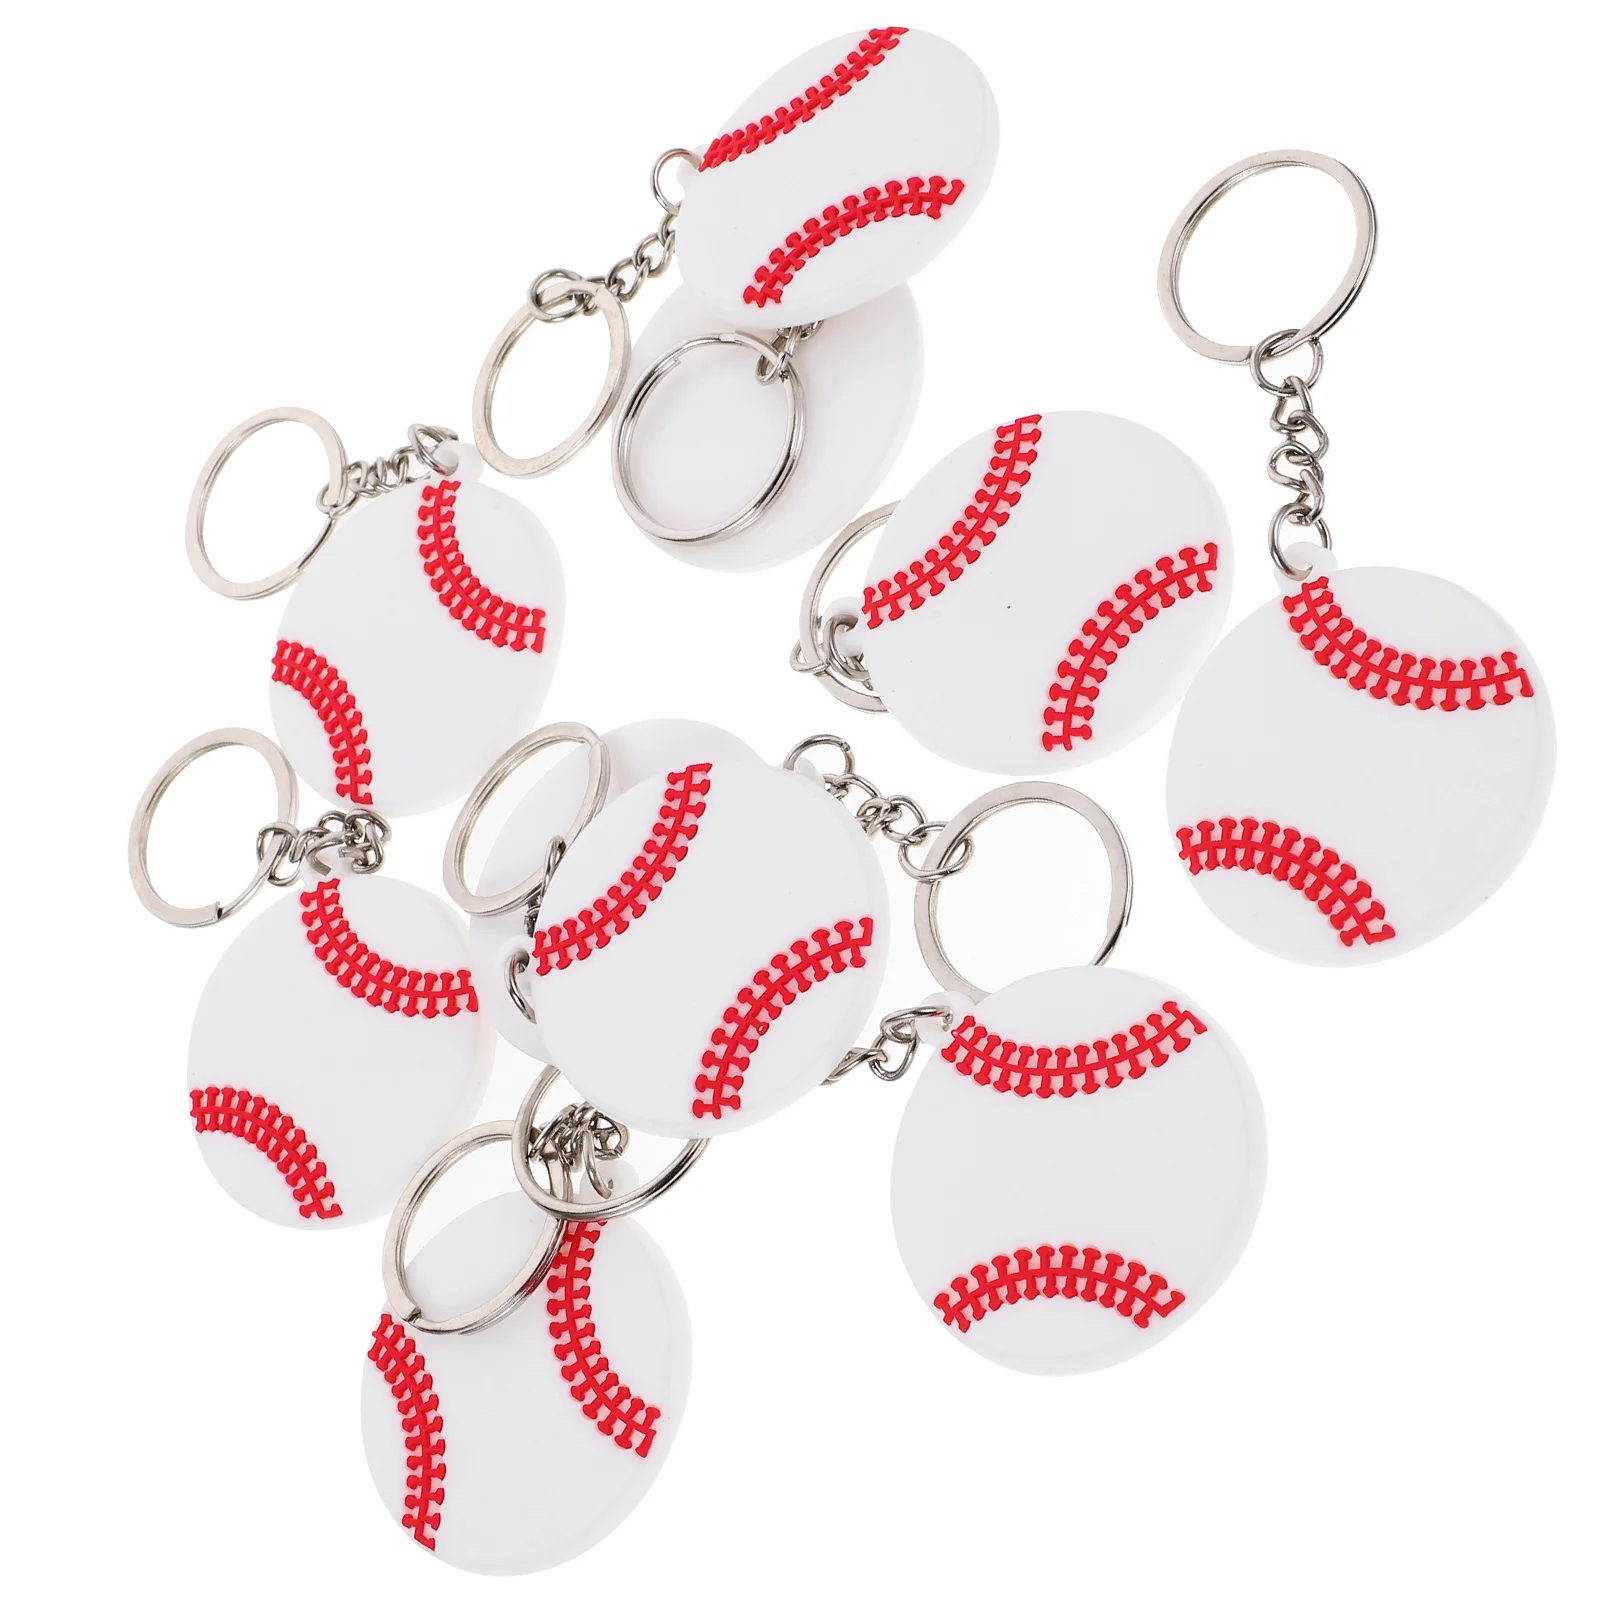 20 Pcs Volleyball Keychains Volleyball Charm Sports Key Pendants Bag Pendant Volleyball Stuff Sports Accessires 5 pcs key chain mini backpack keychain ring pendant bag charm baseball keychains women sports party favors kids miss